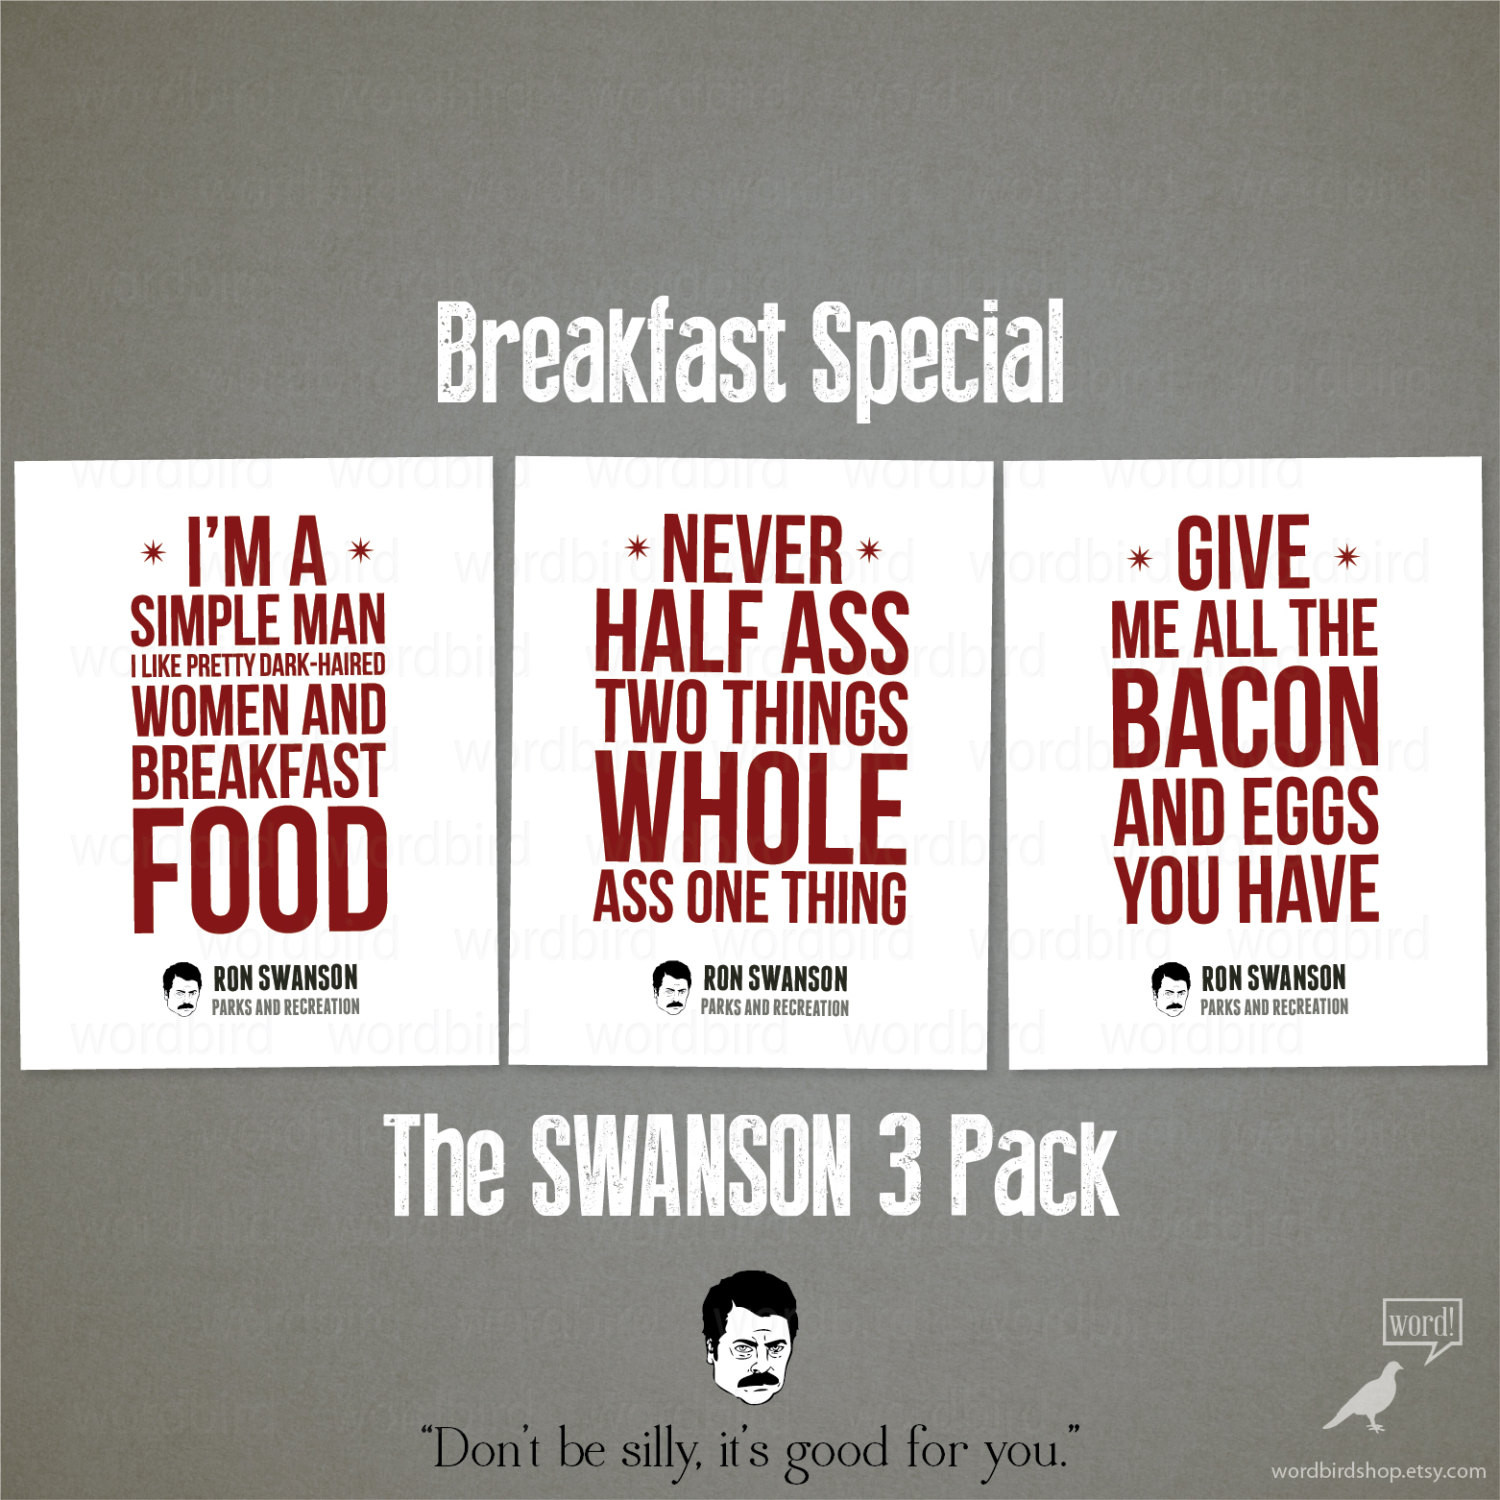 Ron Swanson Motivational Quotes
 Ron Swanson Quotes Motivational Wall Decor by WordBirdShop